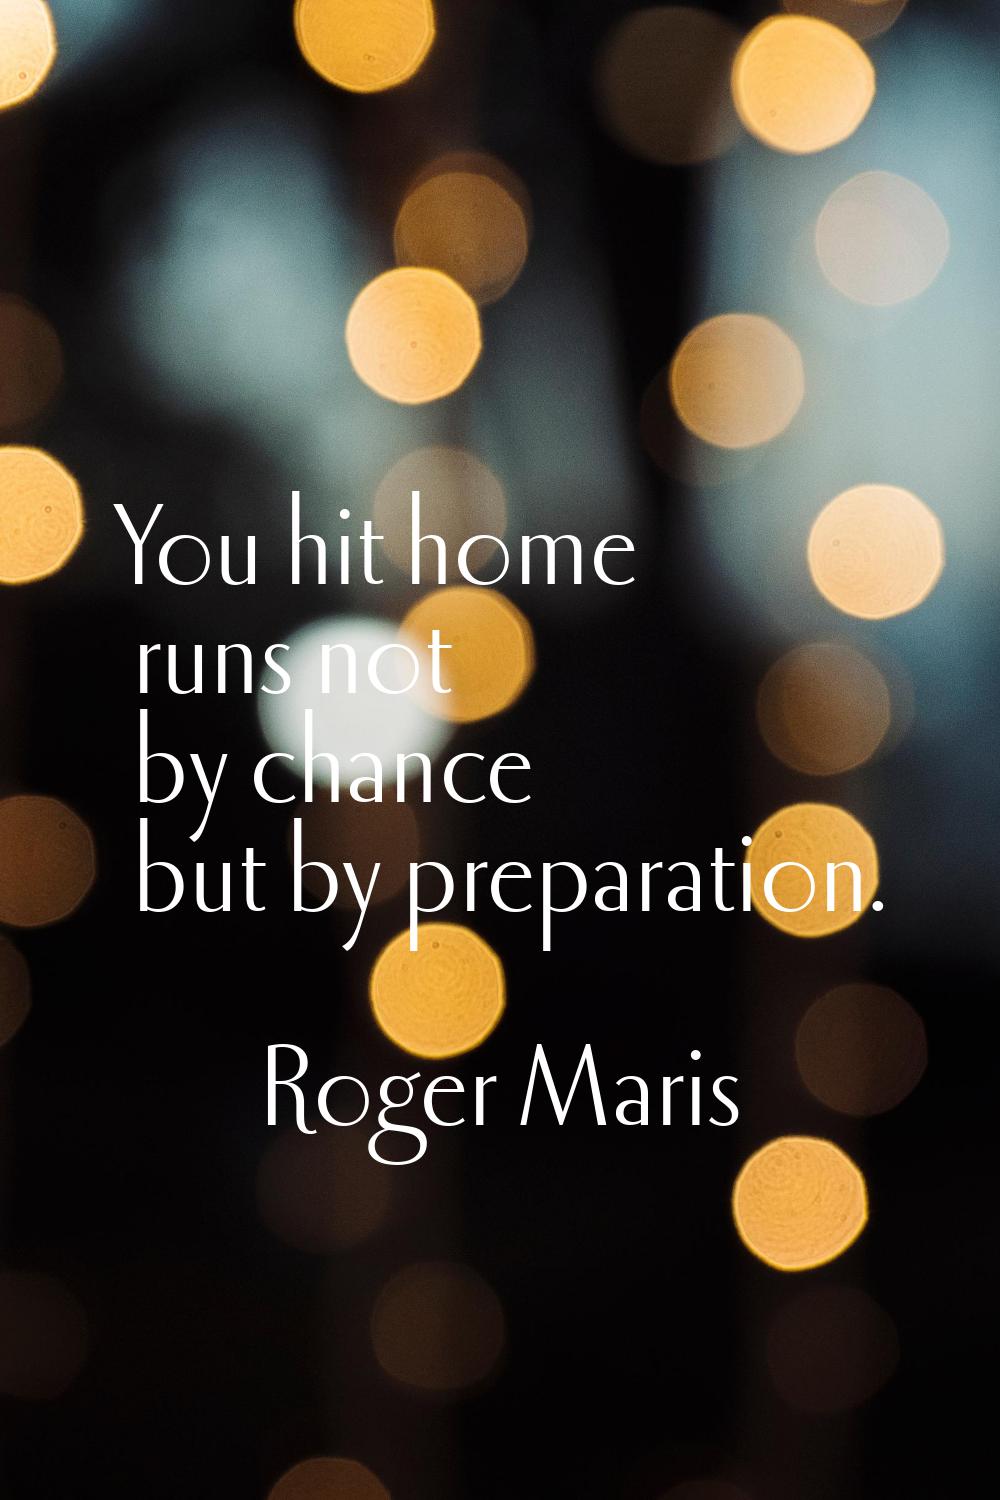 You hit home runs not by chance but by preparation.